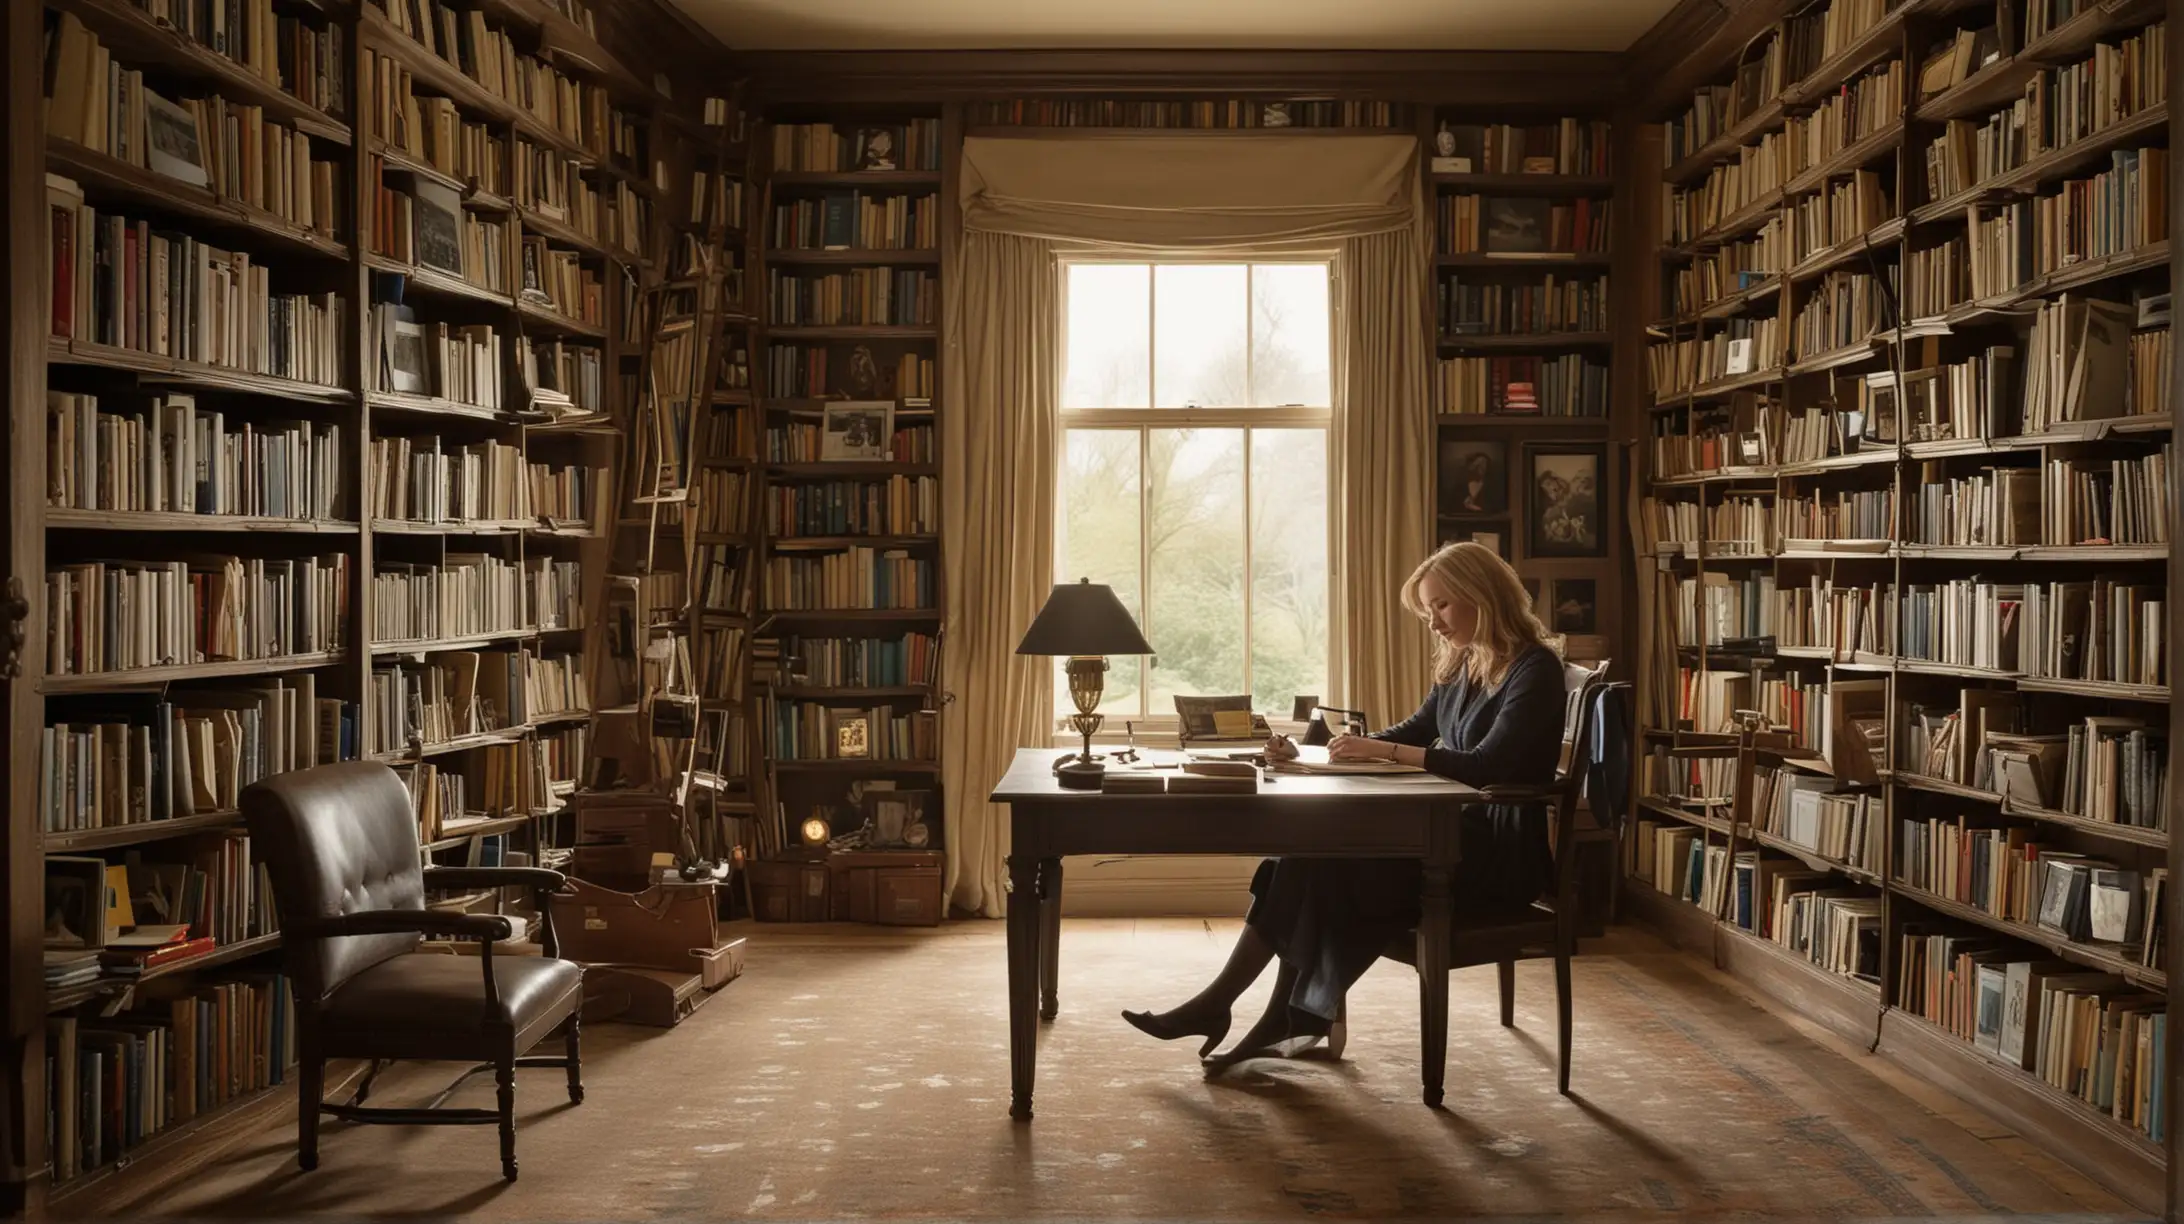 Rowling sits at a grand writing desk in a sunlit study, surrounded by floor-to-ceiling bookshelves filled with literary classics and personal mementos. She takes a moment to savor the silence and solitude of her sanctuary, grateful for the opportunity to pursue her passion.